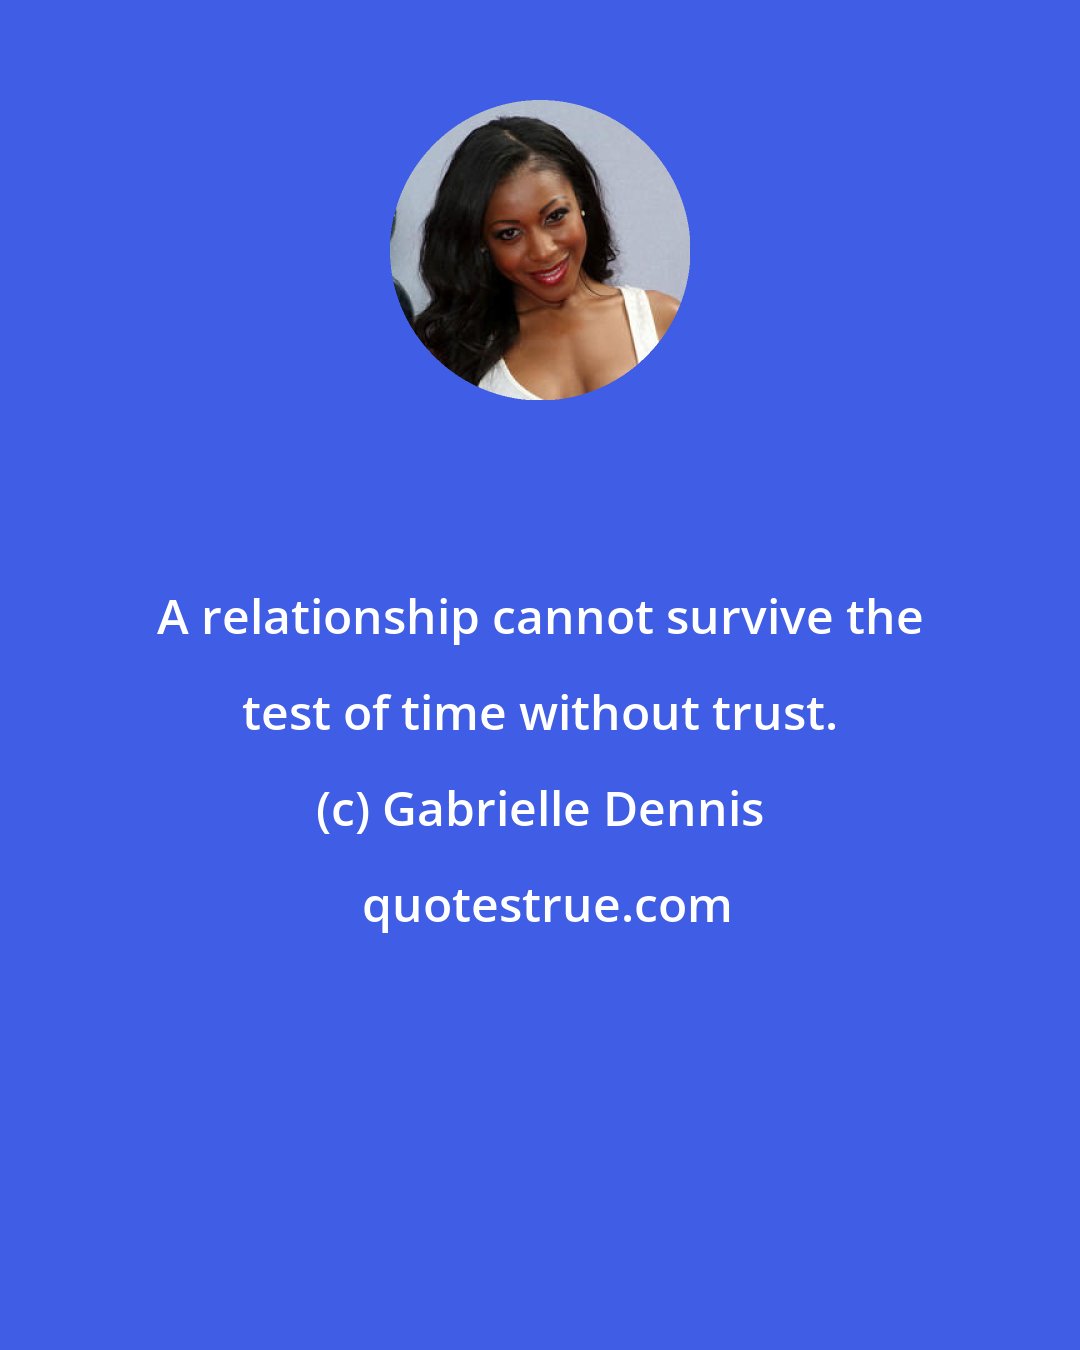 Gabrielle Dennis: A relationship cannot survive the test of time without trust.